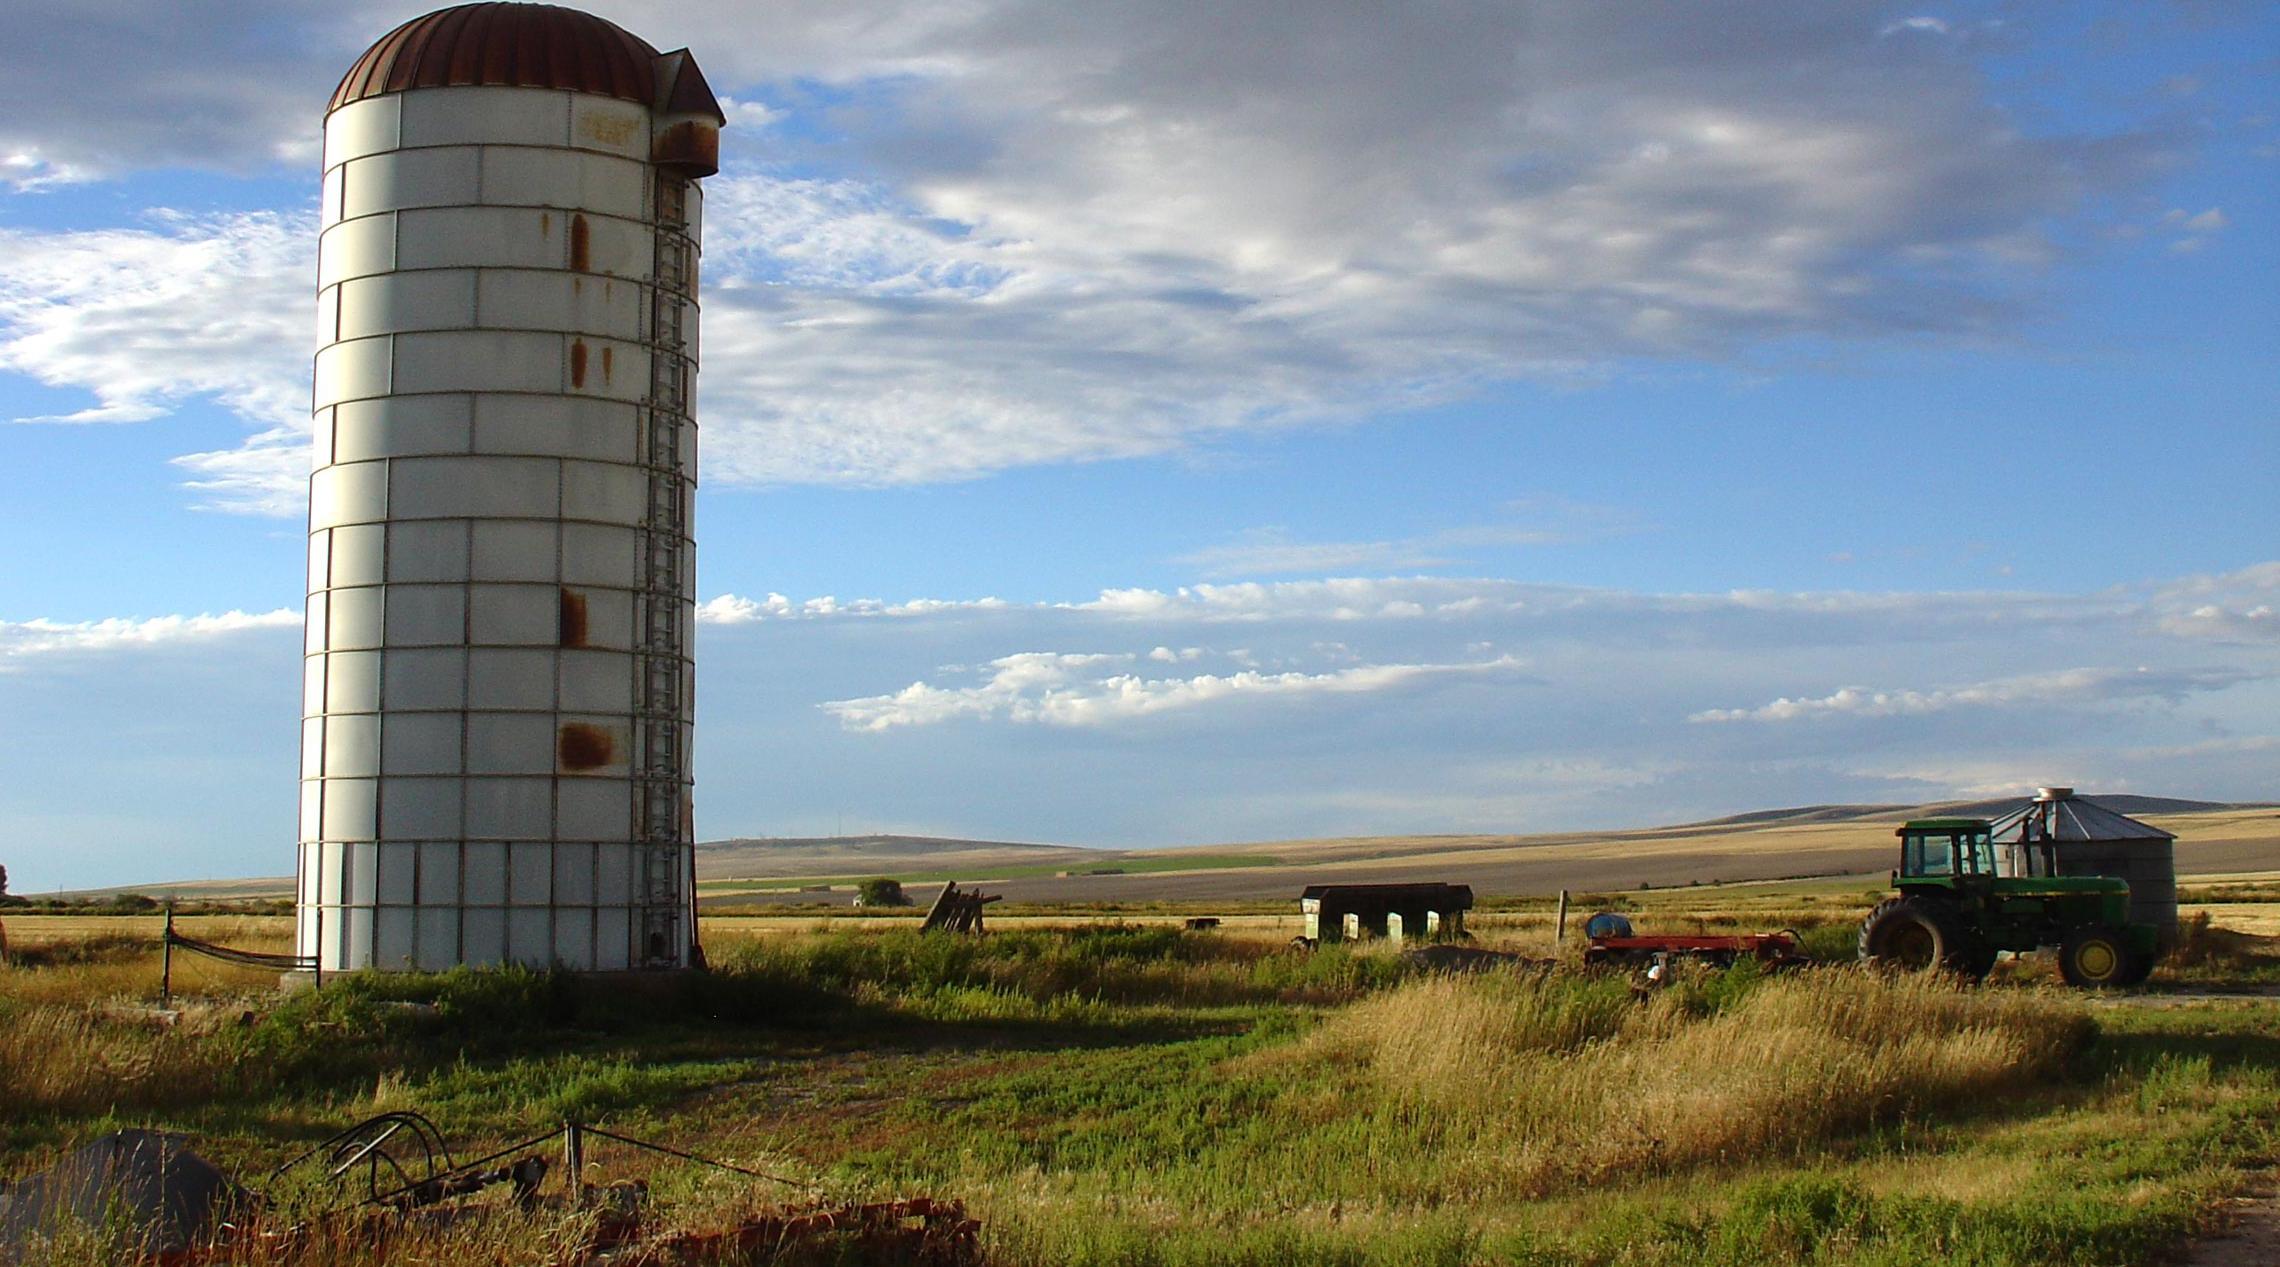 Old silo and farm with a blue sky